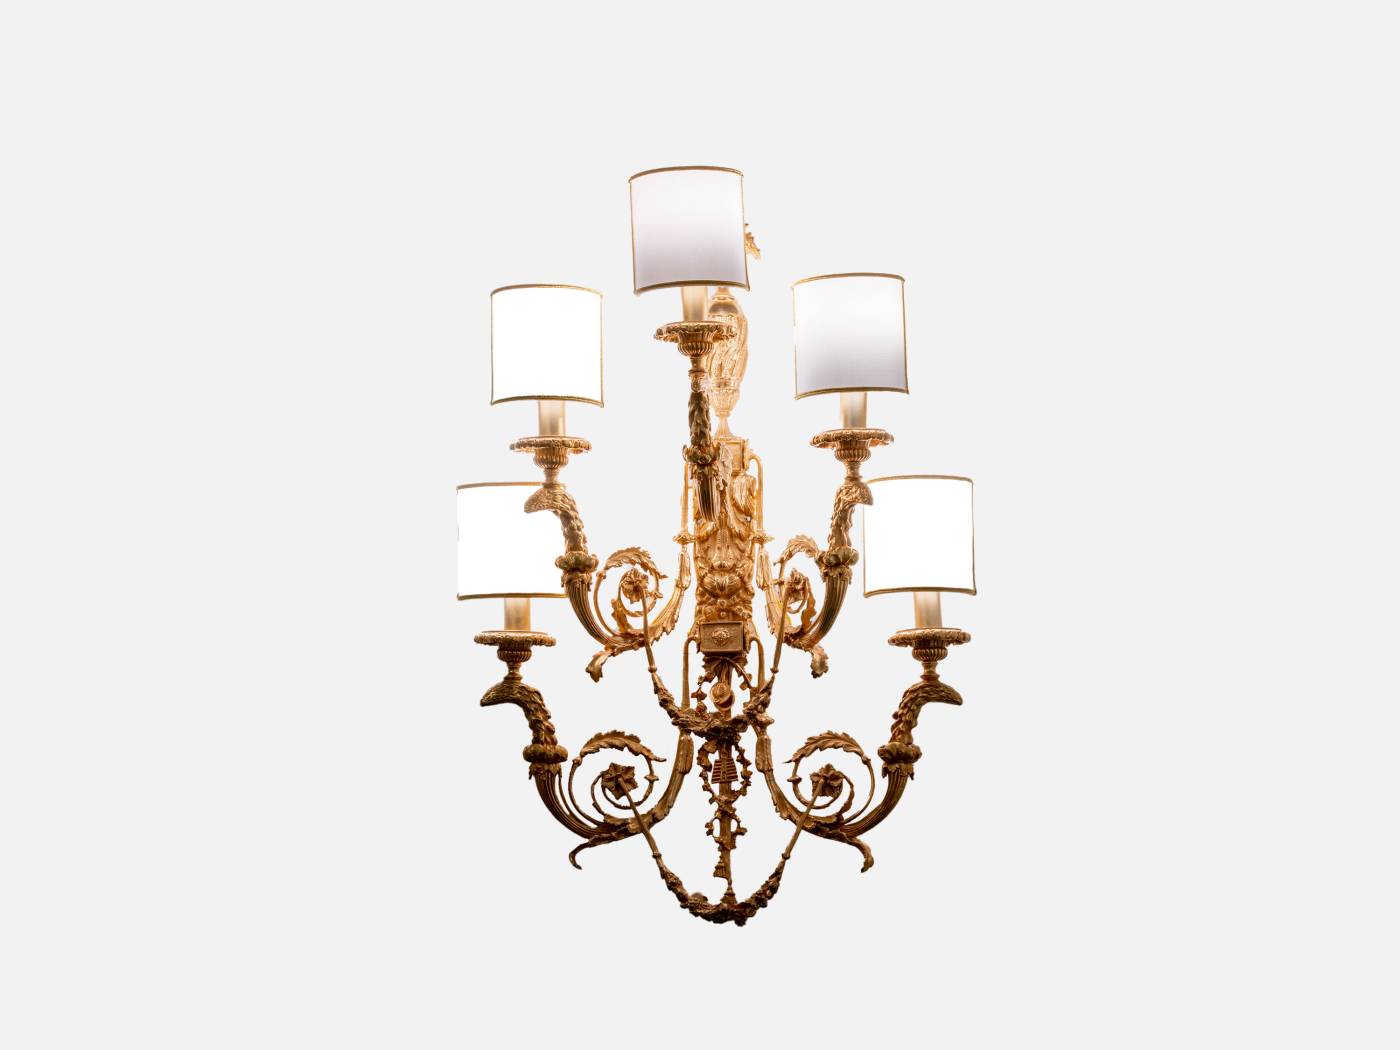 ART. 2306 – Discover the elegance of luxury classic Lighting made in Italy by C.G. Capelletti. Luxury classic furniture that combines style and craftsmanship.